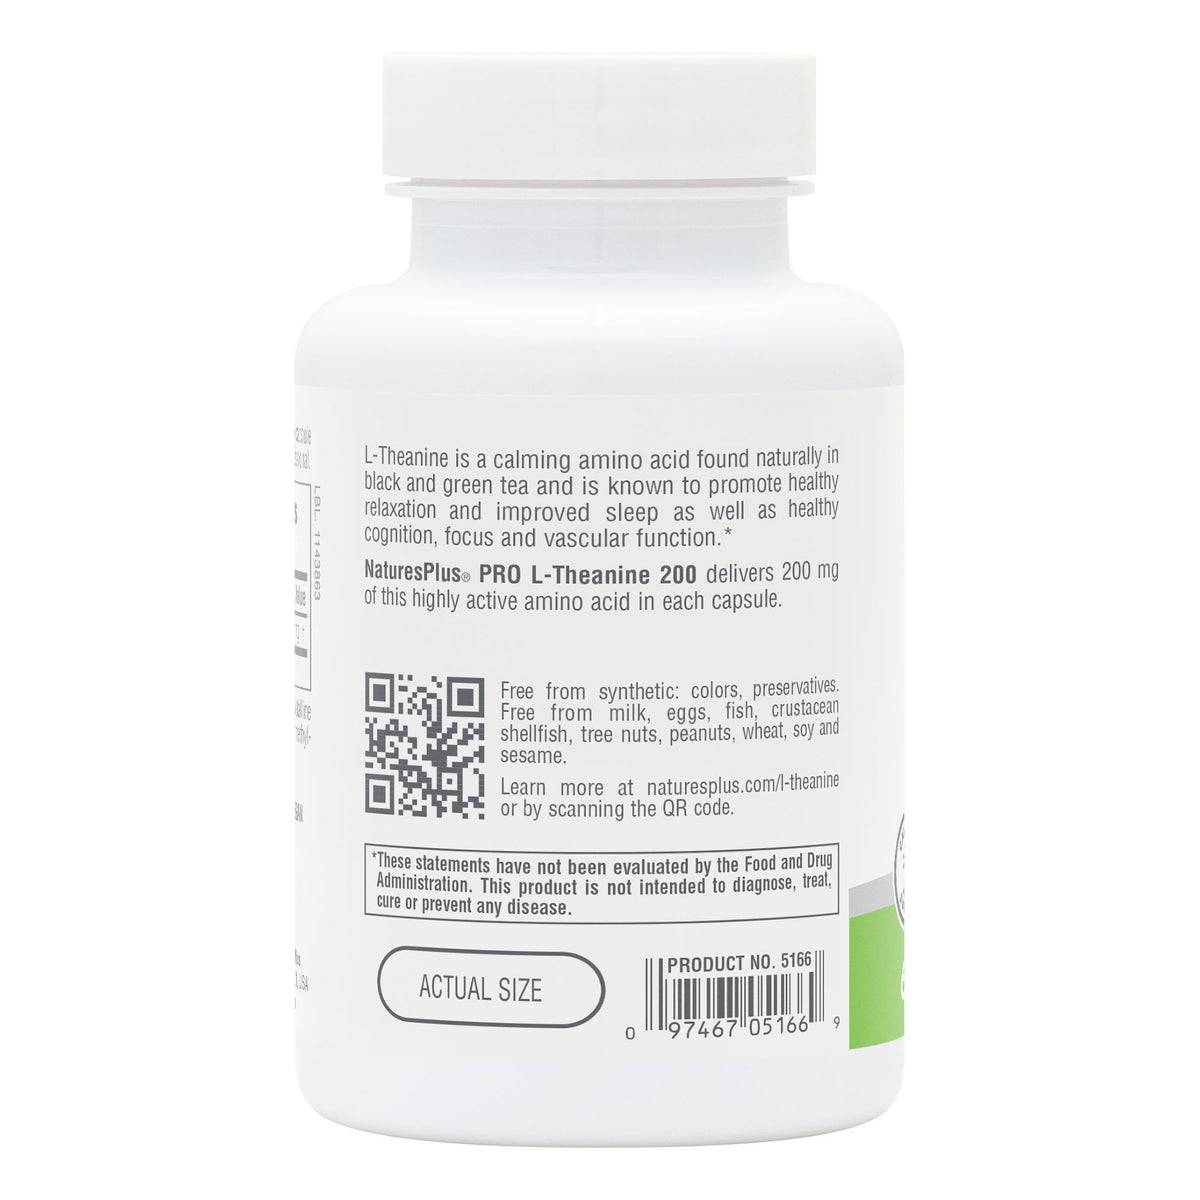 product image of NaturesPlus PRO L-Theanine containing 60 Count